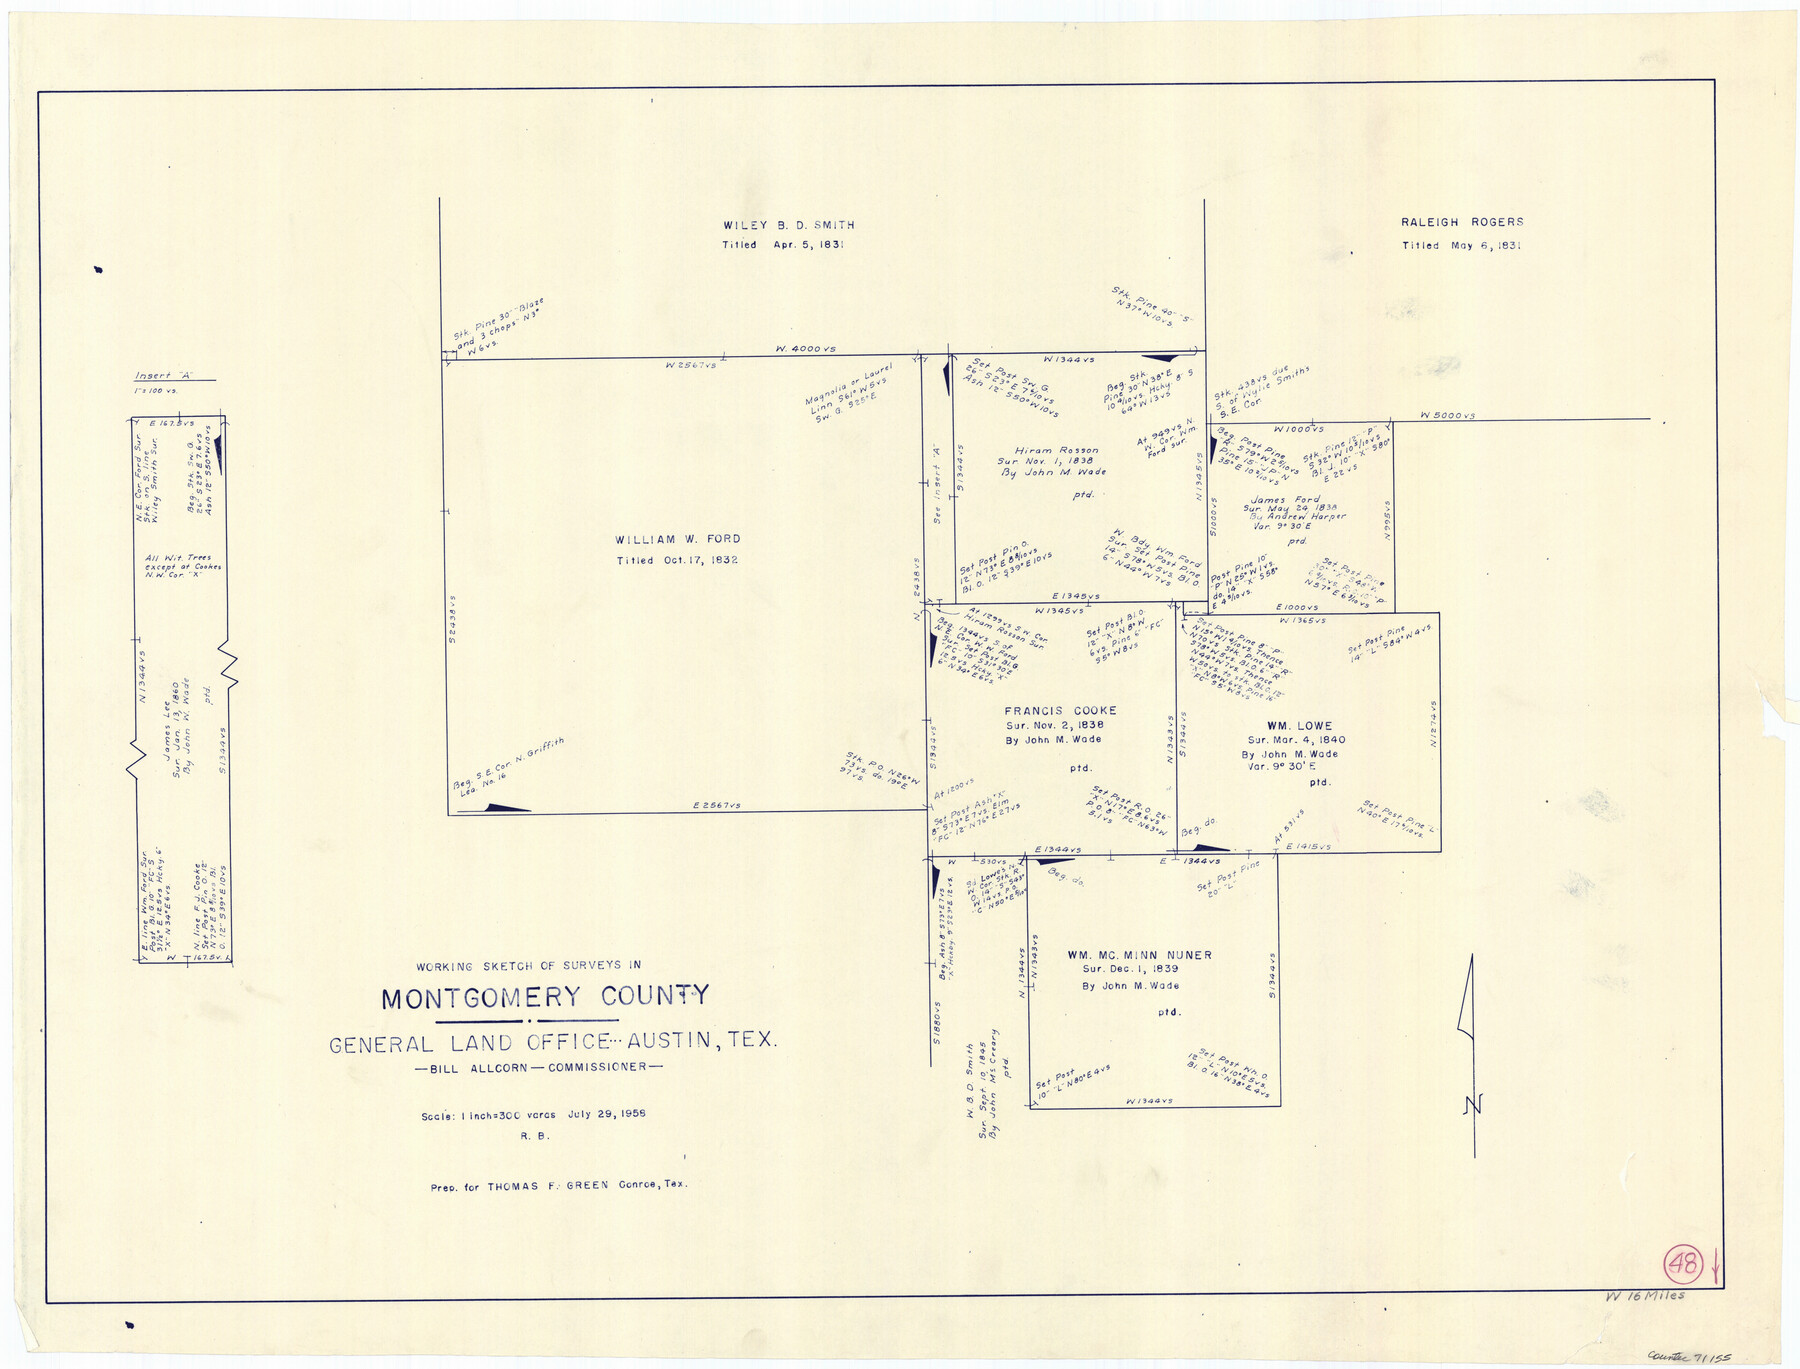 71155, Montgomery County Working Sketch 48, General Map Collection